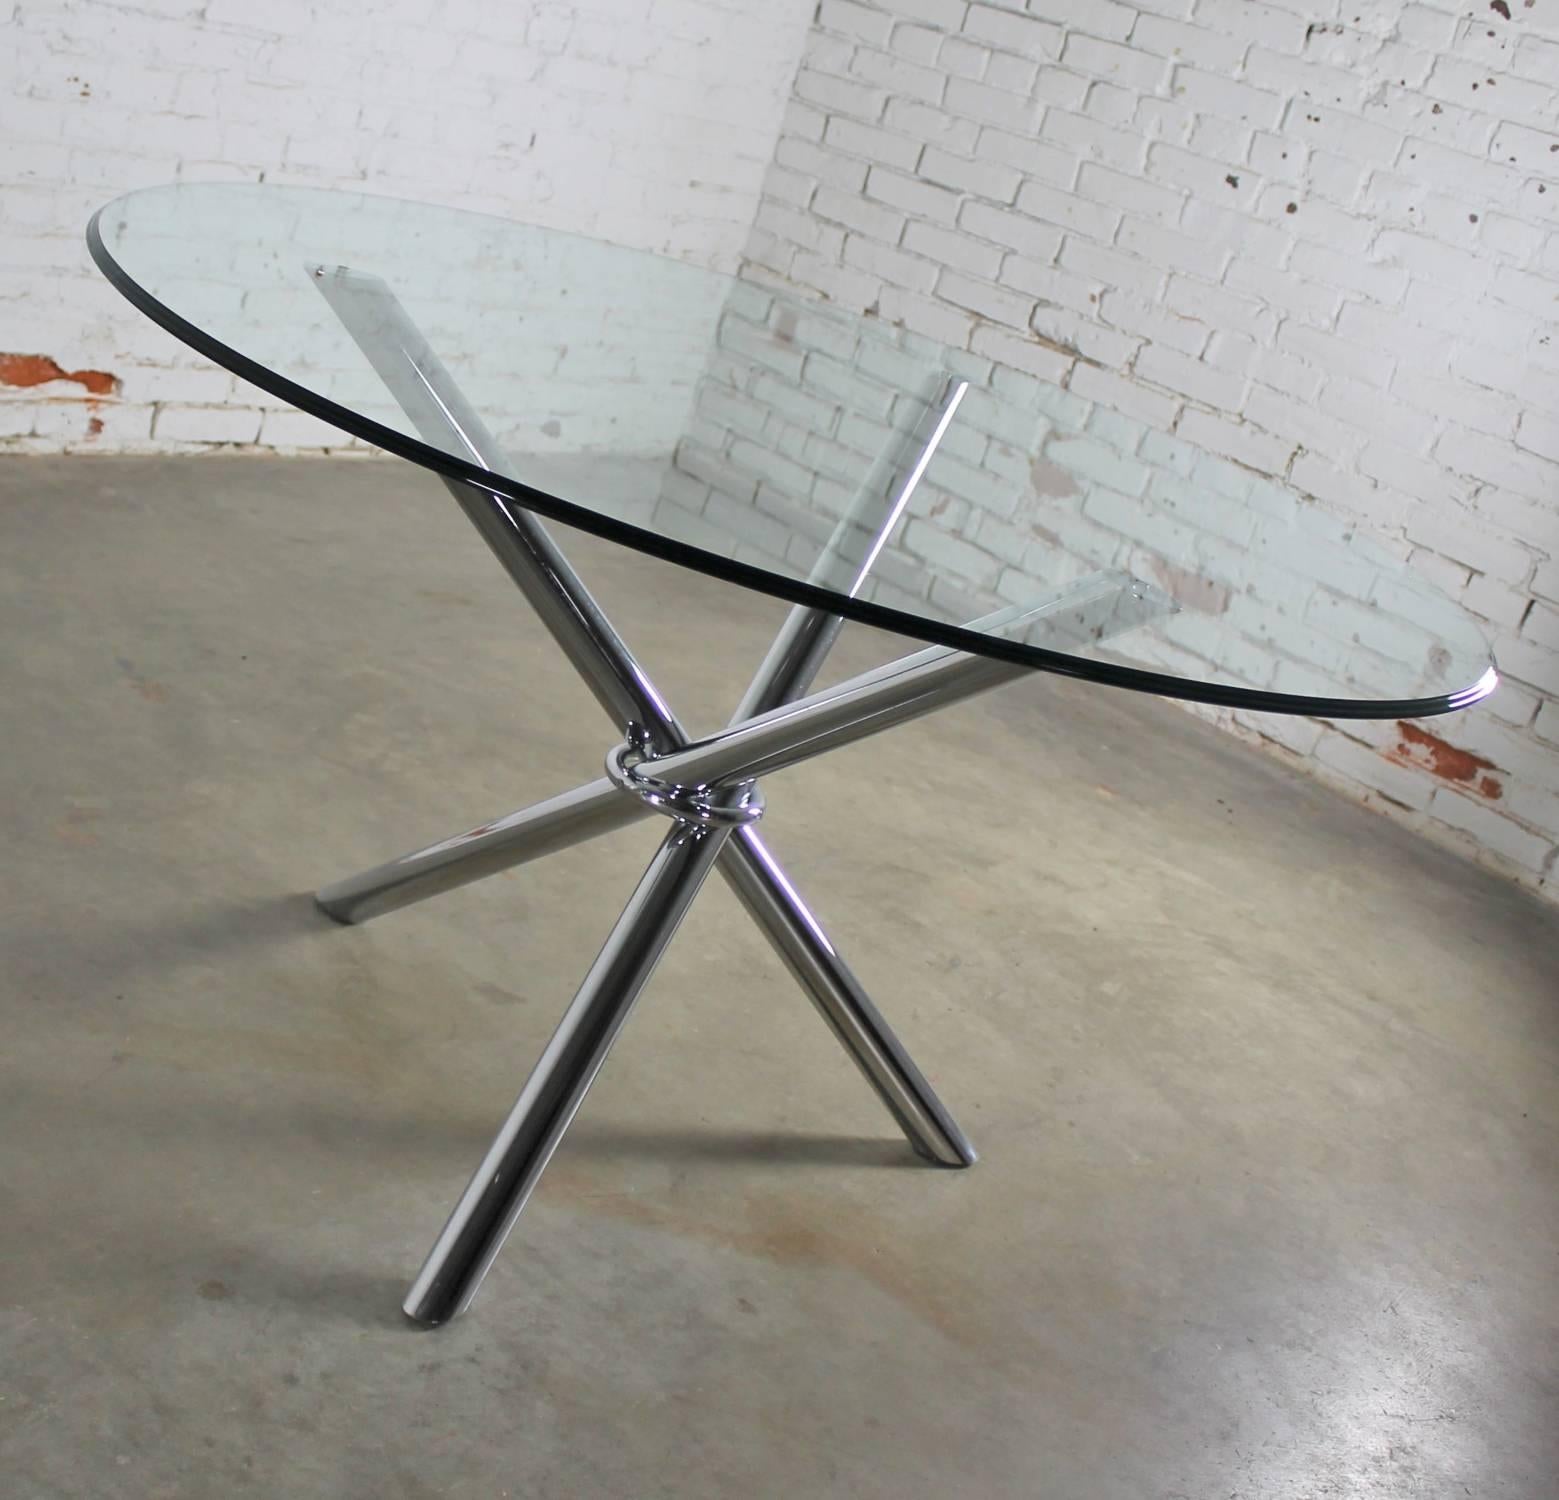 Fabulous Mid-Century Modern style jacks-like chrome tubular tripod based glass top round table in the manner of Milo Baughman. This table comes with a 48-inch round ½” thick glass top with an ogee edge. Both base and glass are in almost new